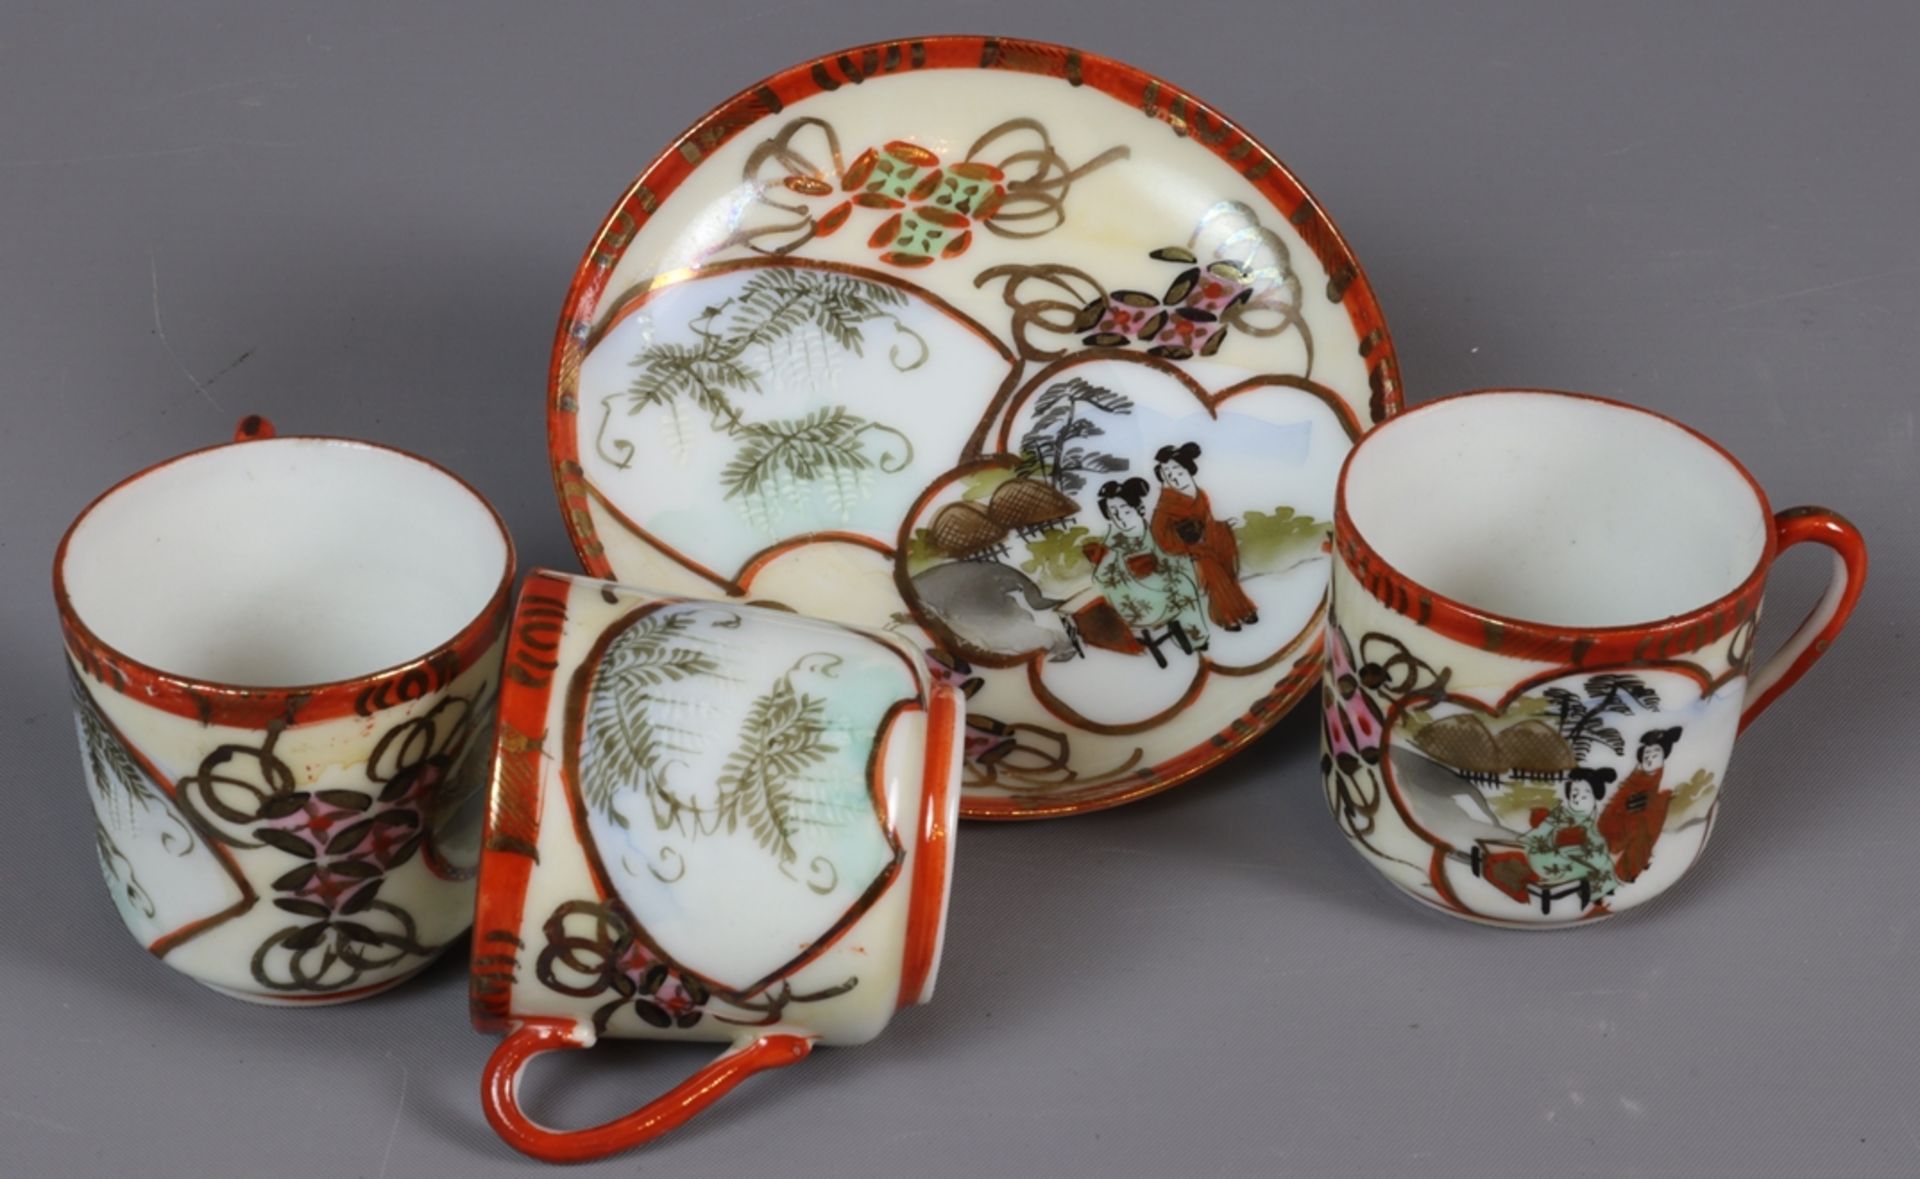 Lot of Asian porcelain, first half of the 20th century, China - Image 8 of 9